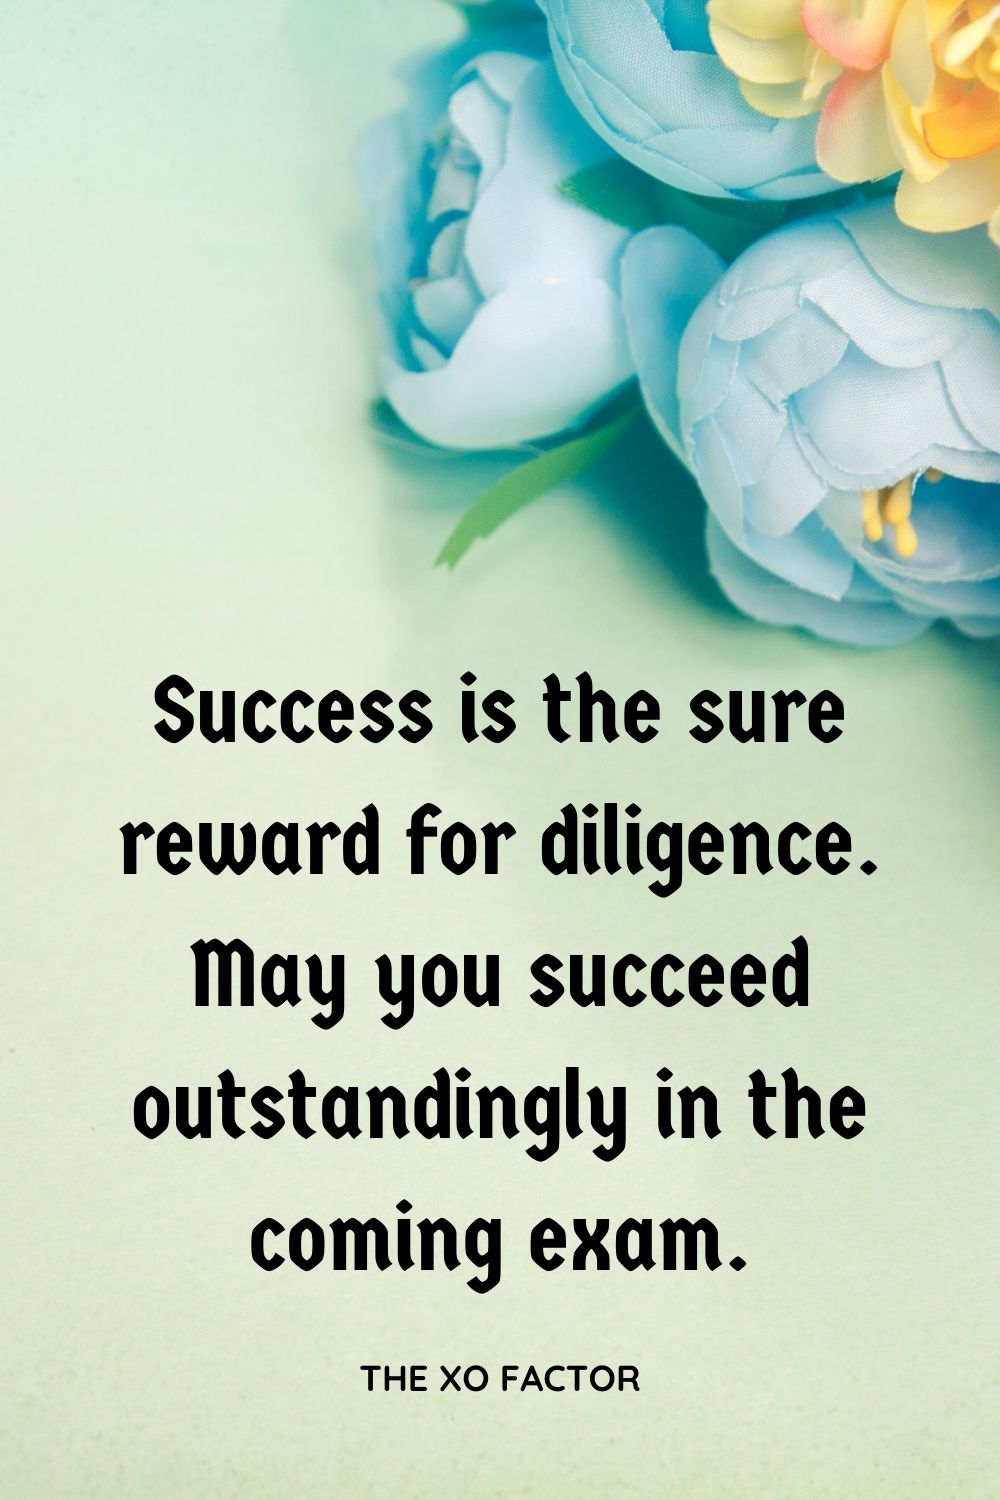 Success is the sure reward for diligence. May you succeed outstandingly in the coming exam.